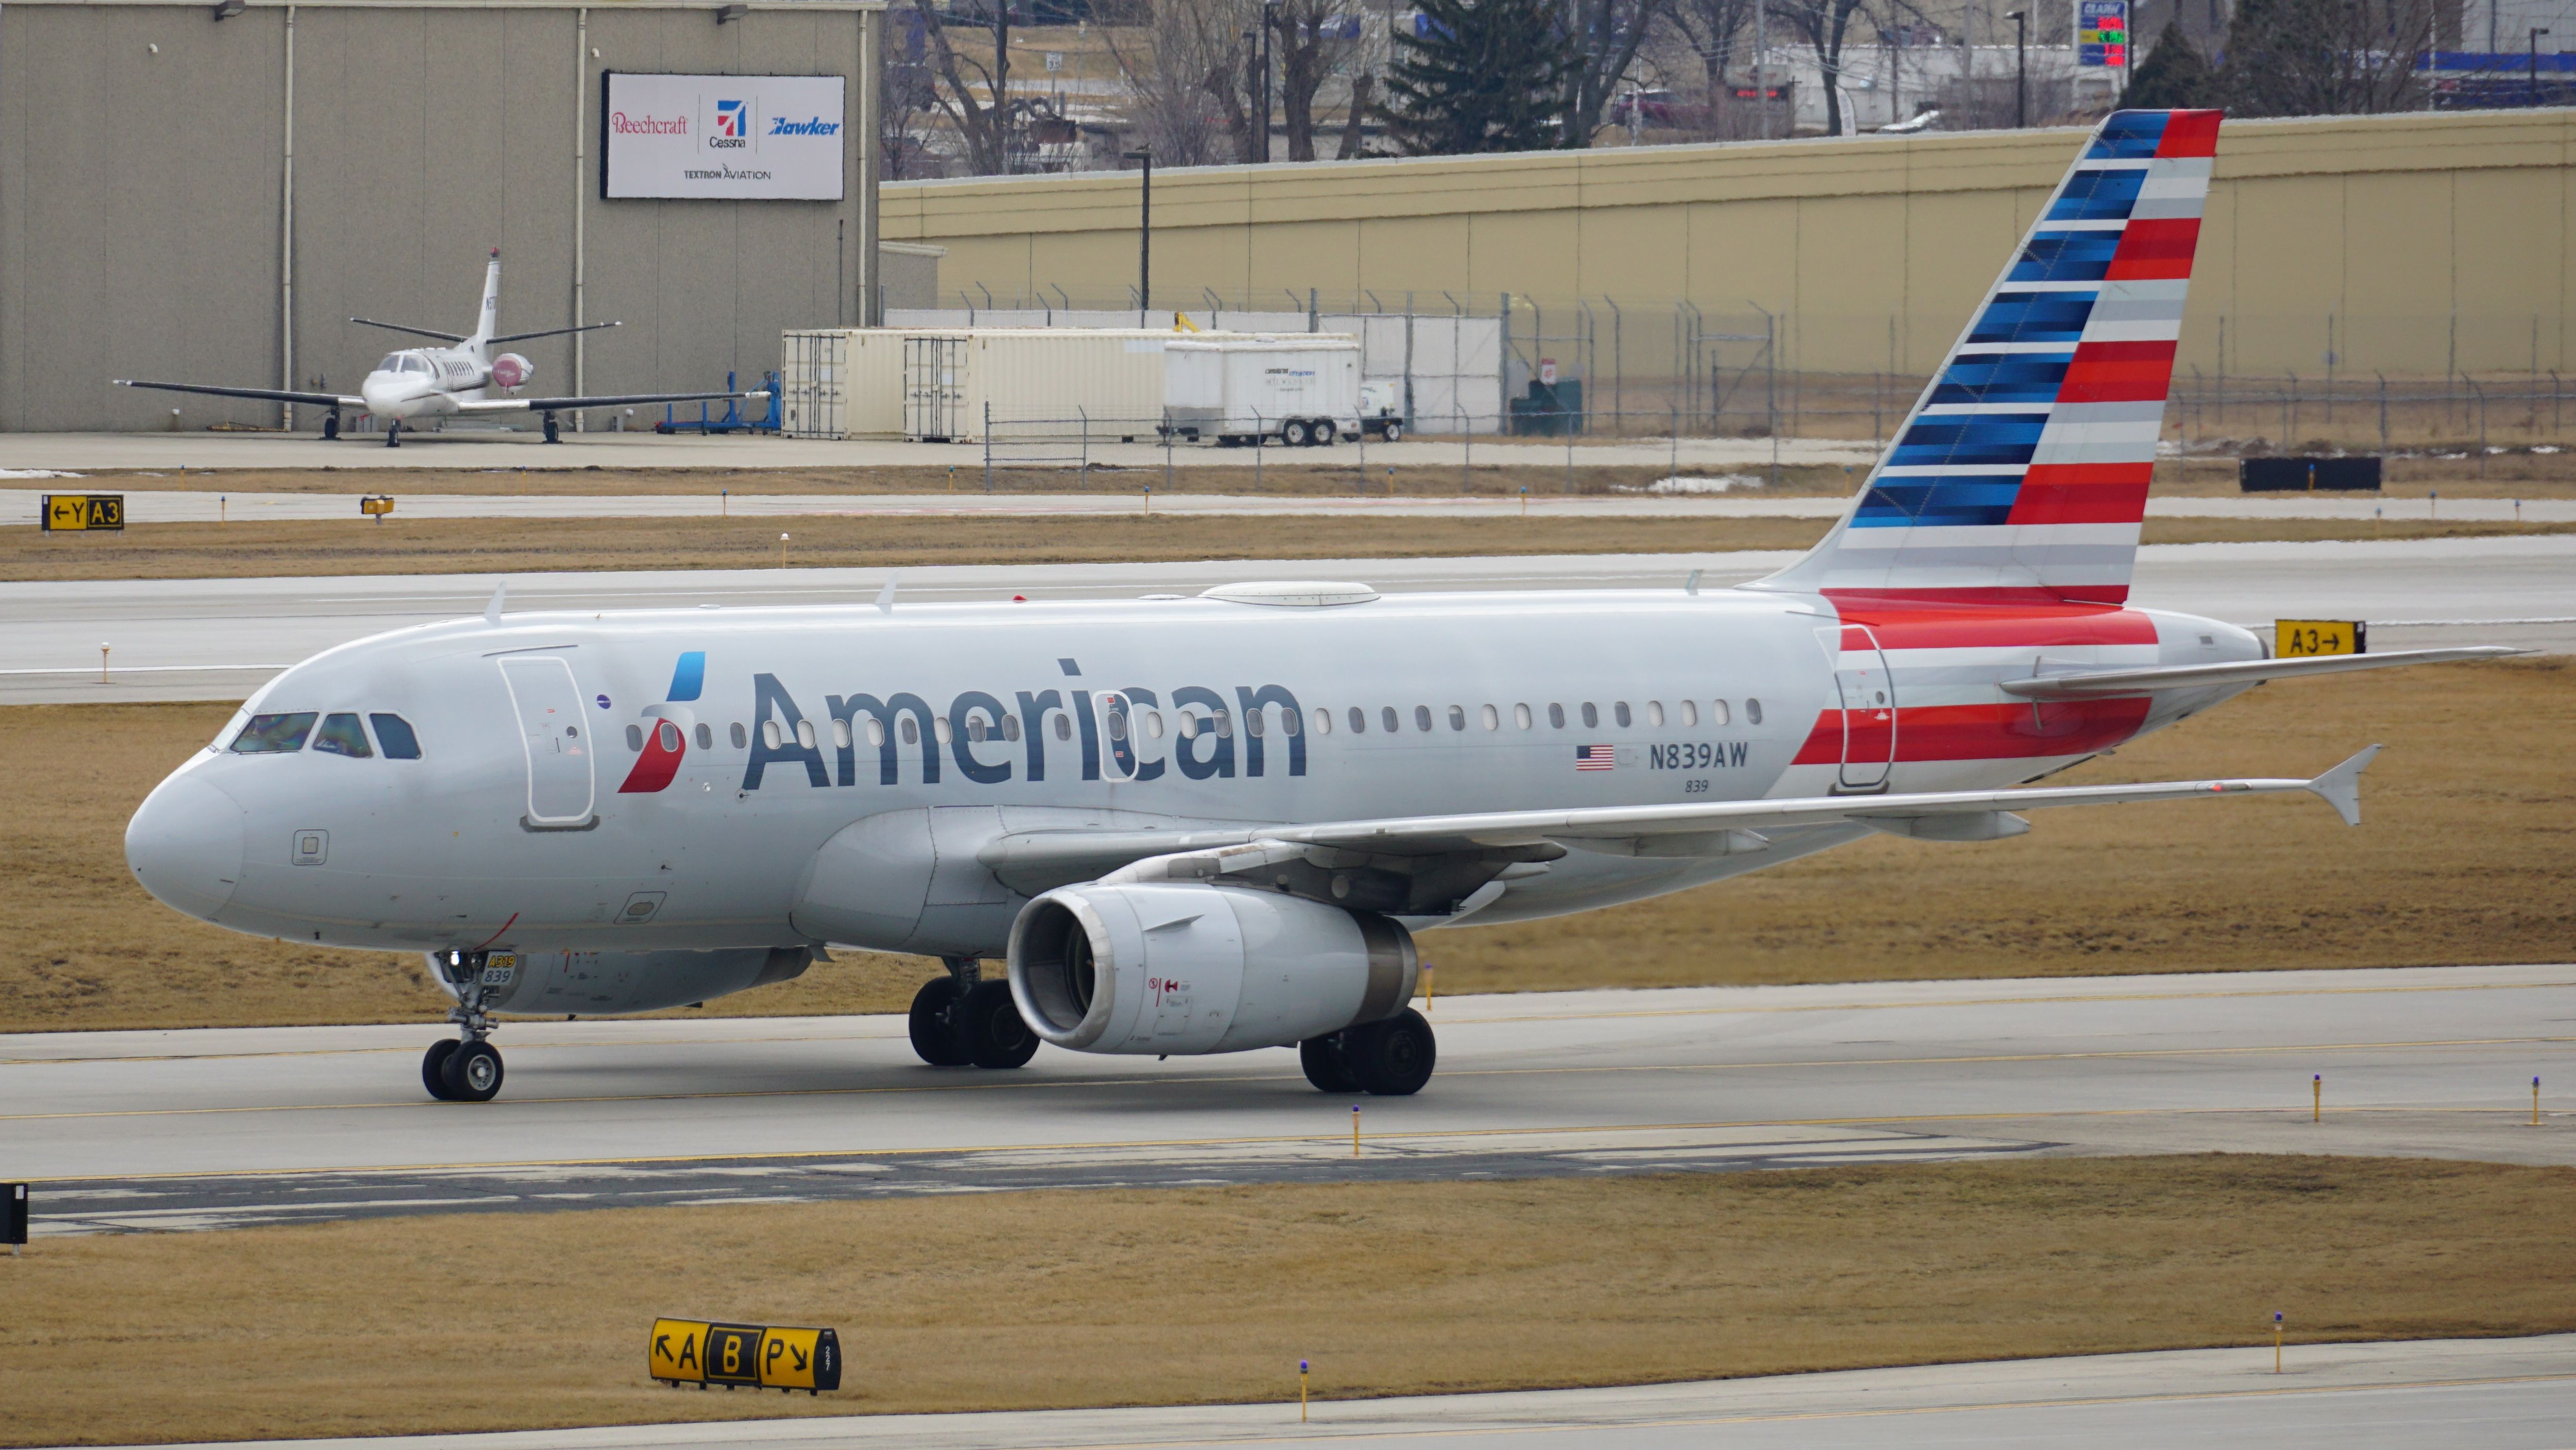 American Airlines Airbus A319 taxies on the runway after landing at Milwaukee General Mitchell International Airport.